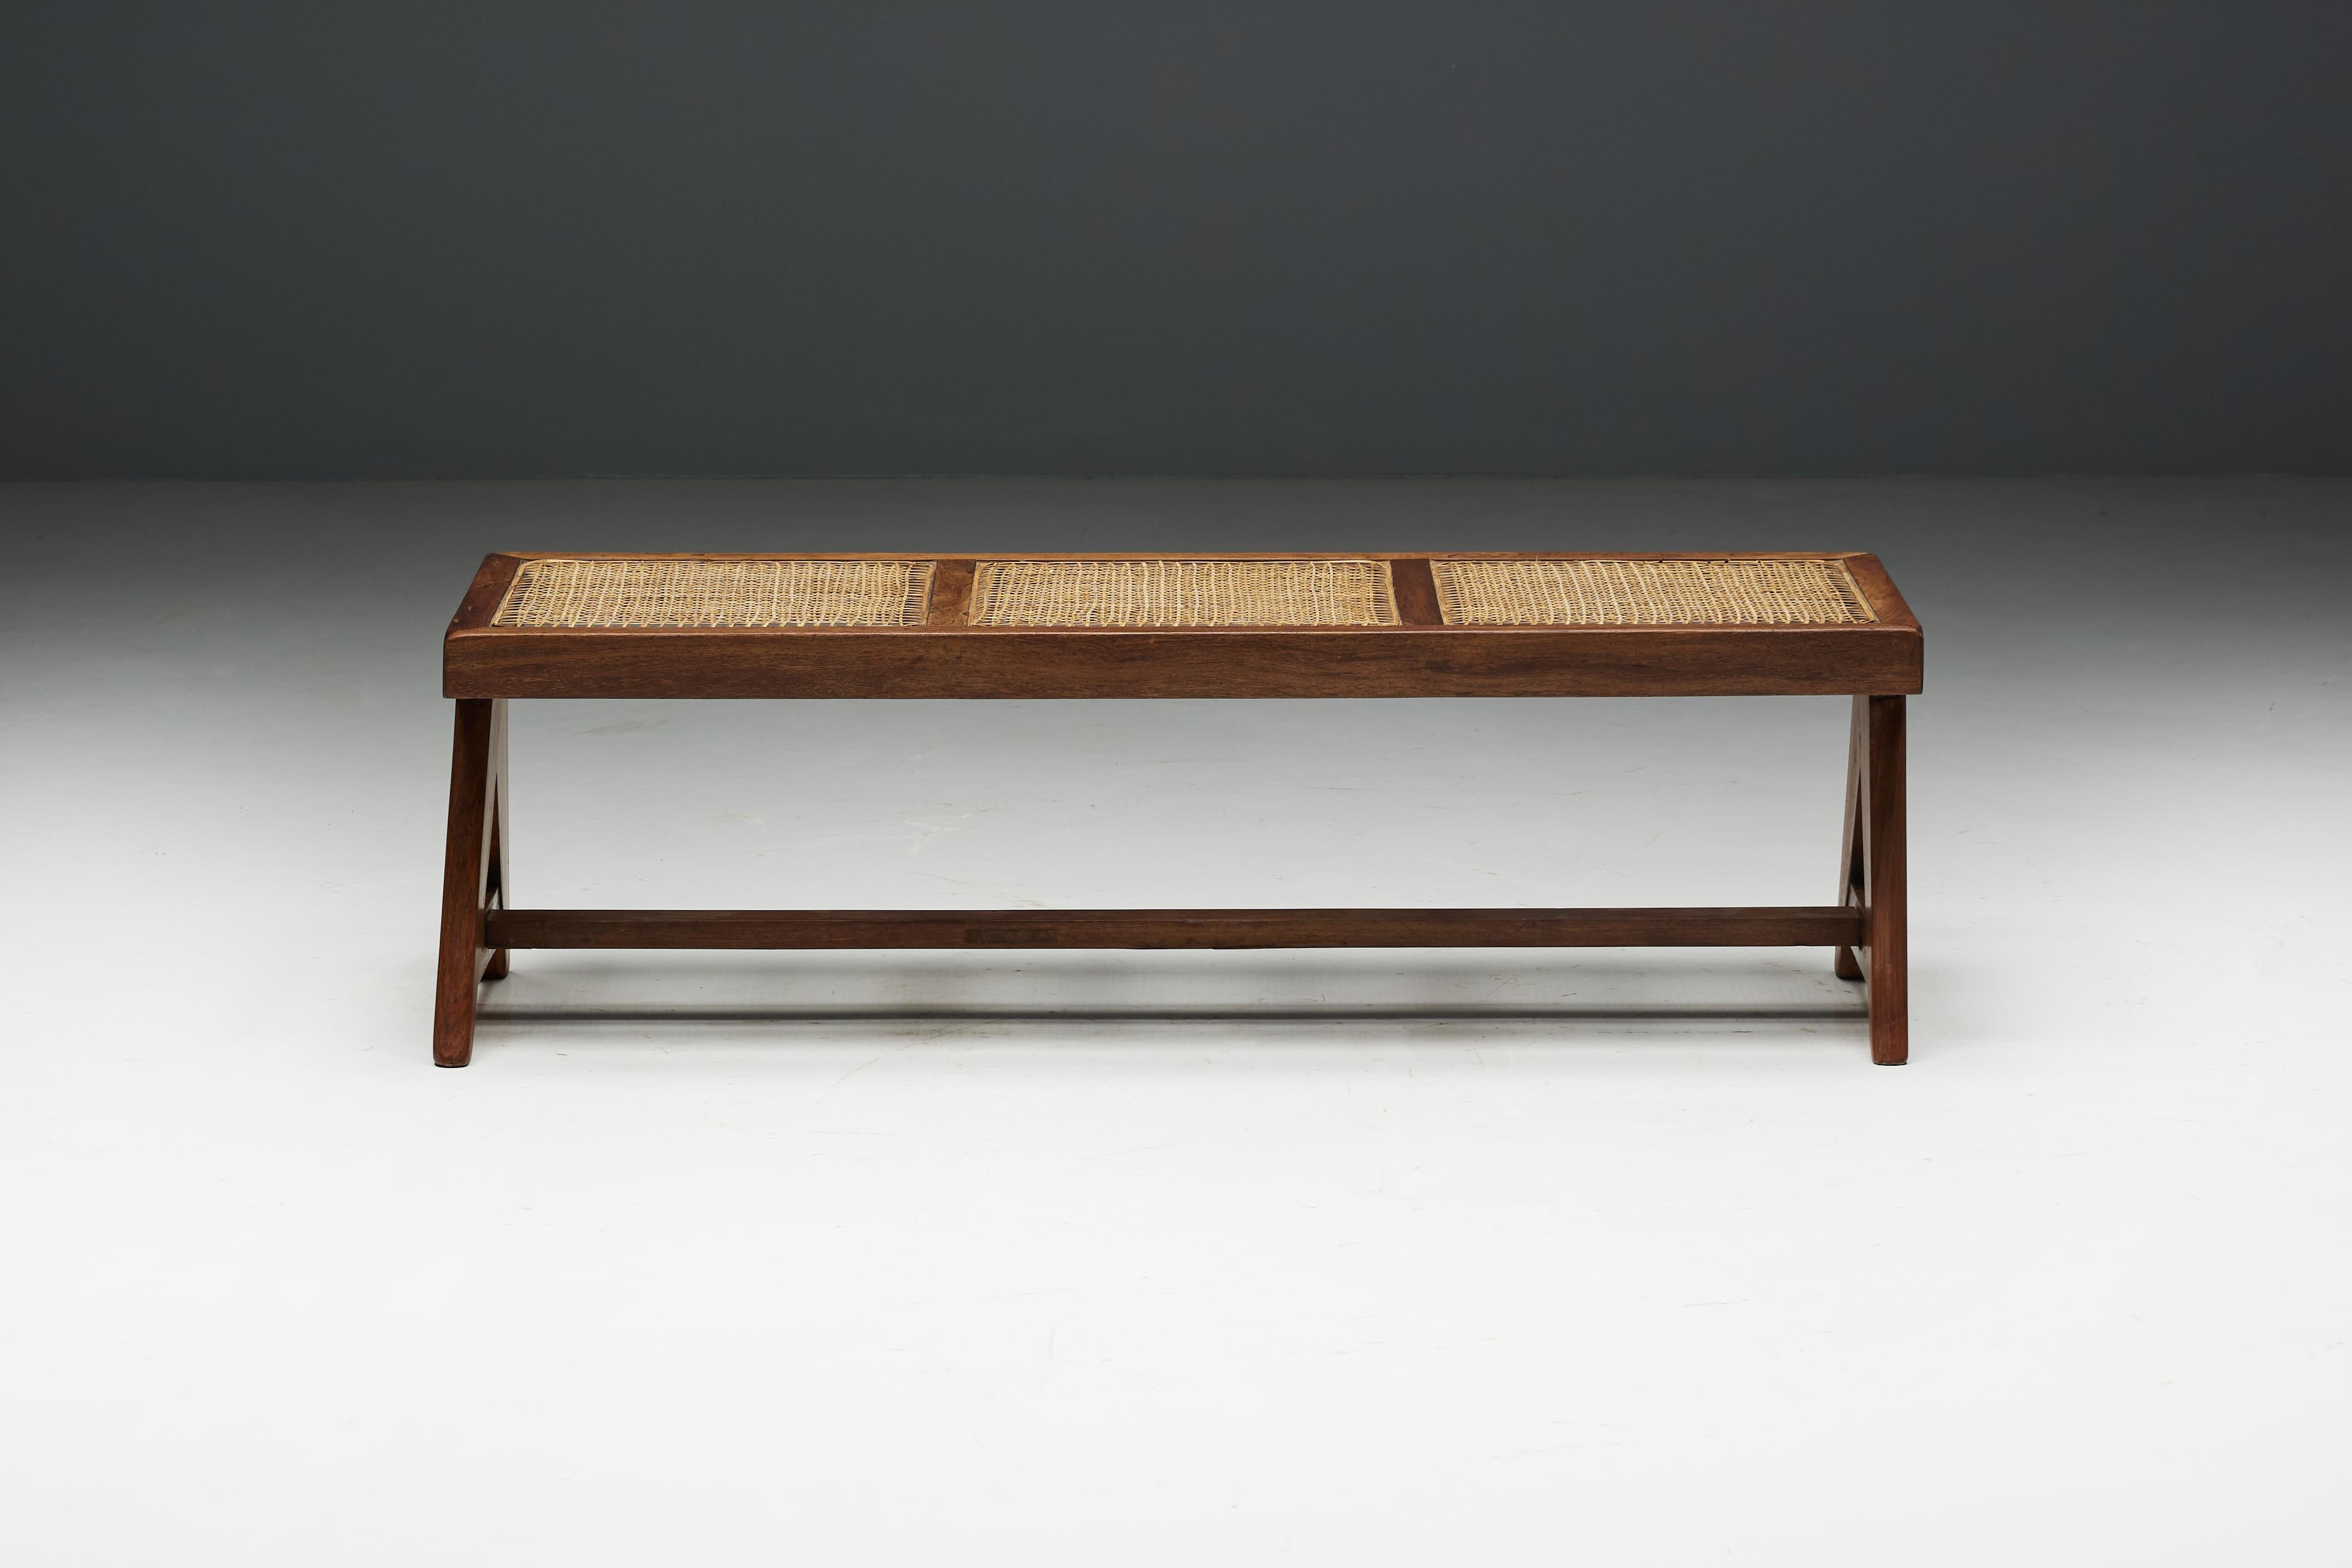 Cane Teak Bench PJ-SI-33B by Pierre Jeanneret, India, 1950s For Sale